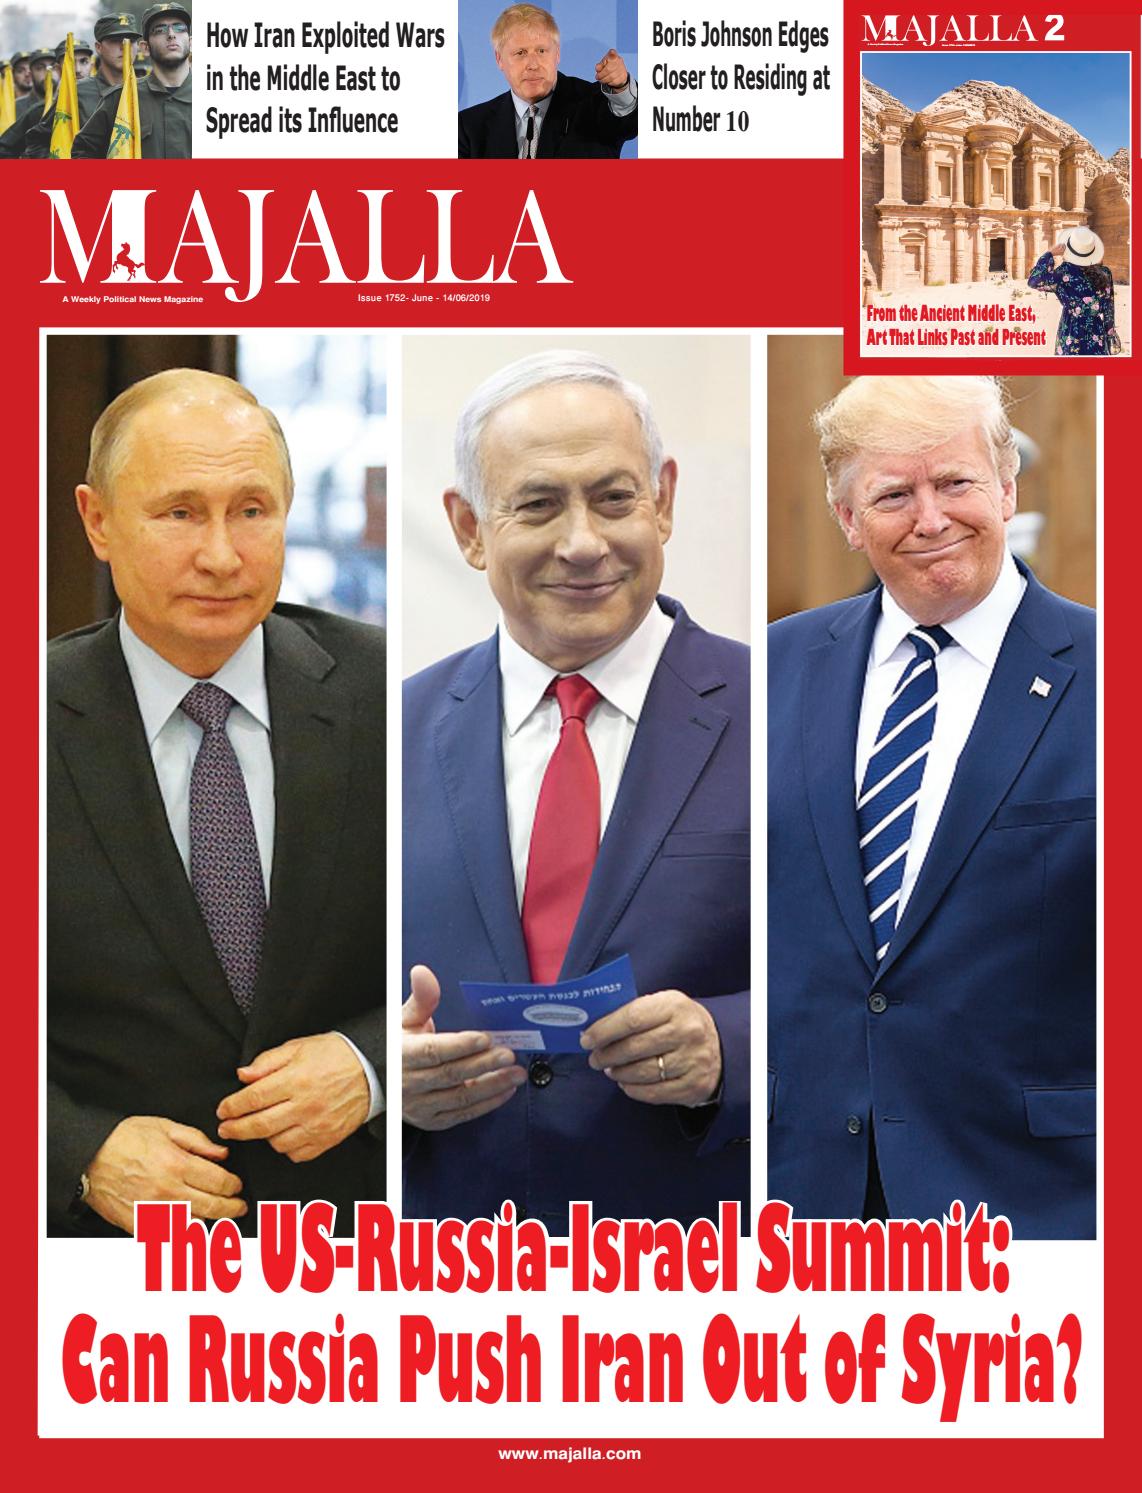 The US-Russia-Israel Summit: Can Russia Push Iran Out of Syria? by Majalla Magazine - HH Saudi Research & Marketing (UK) Ltd - issuu